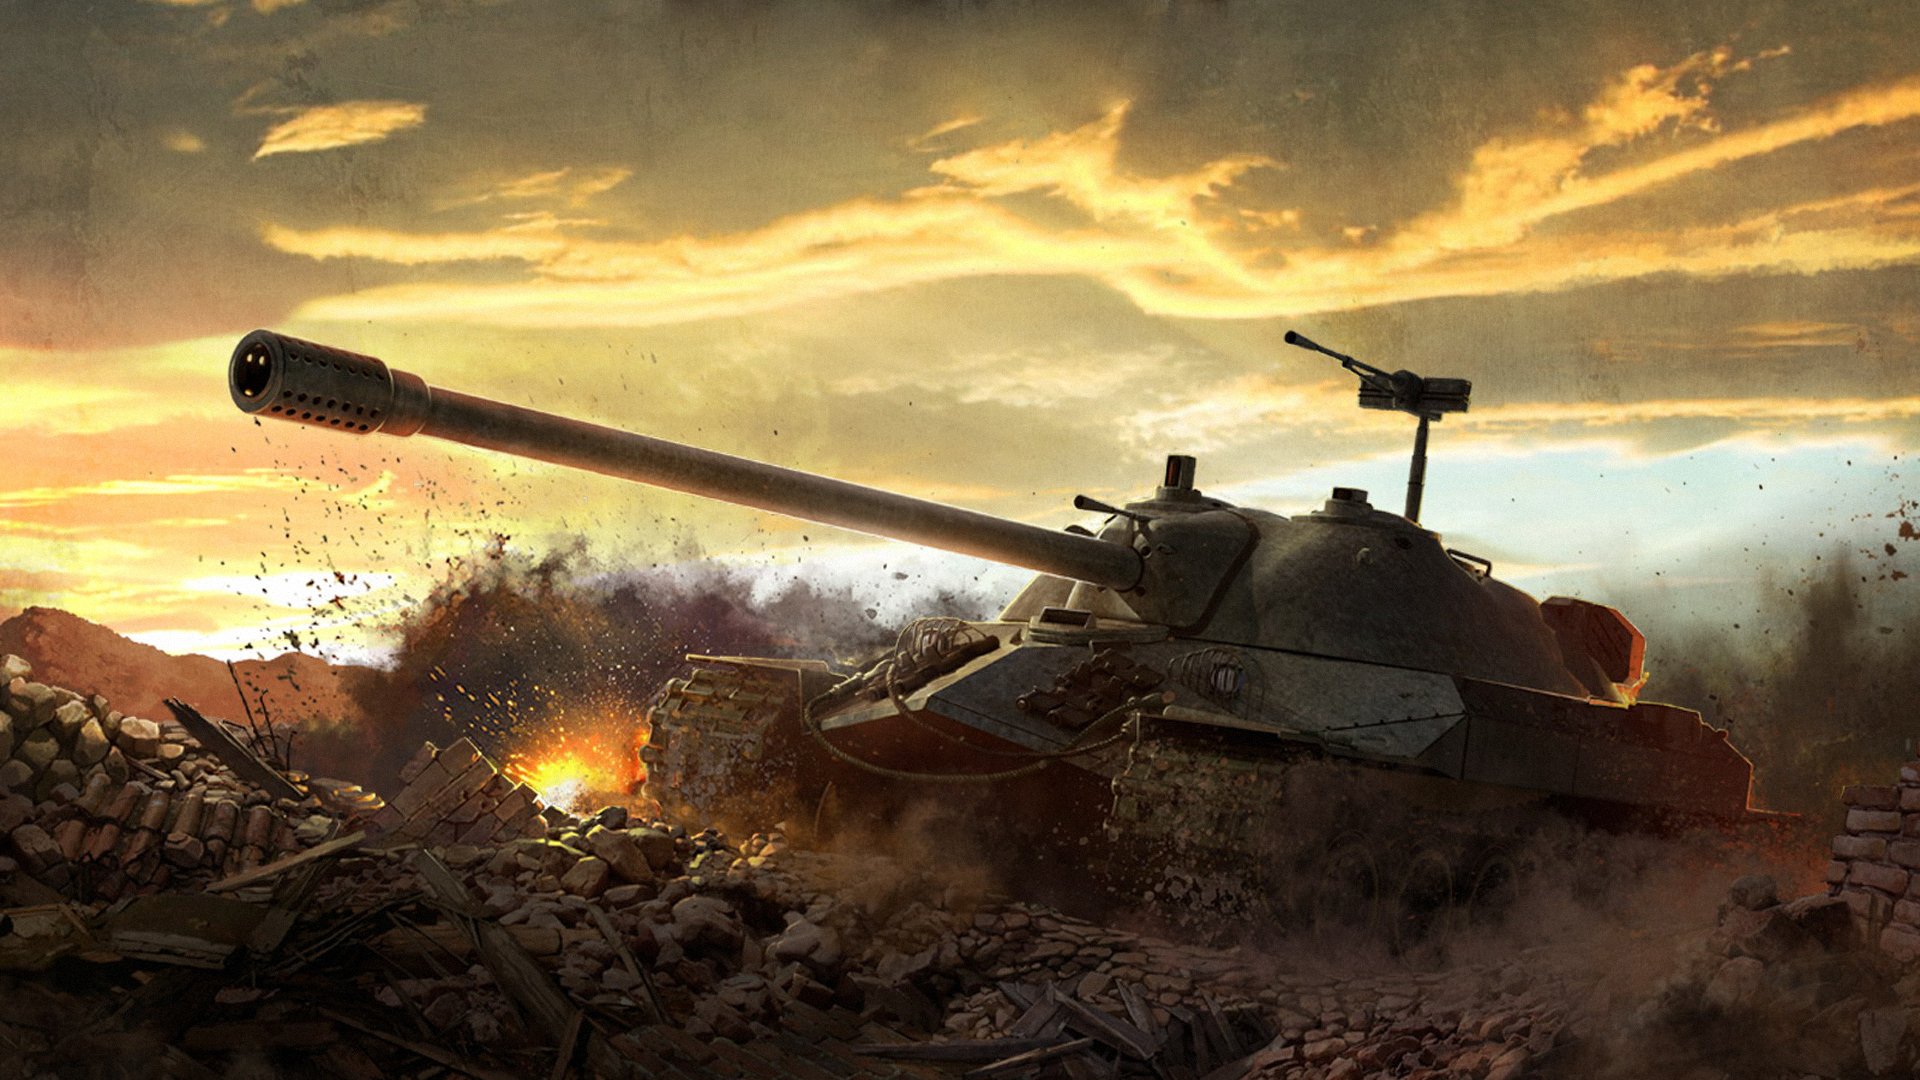 Free Download Army Tank Wallpapers In Hd For Download 19x1080 For Your Desktop Mobile Tablet Explore 49 Tank Wallpaper Hd Tank Background Wallpaper World Of Tanks Wallpaper 19x1080 World